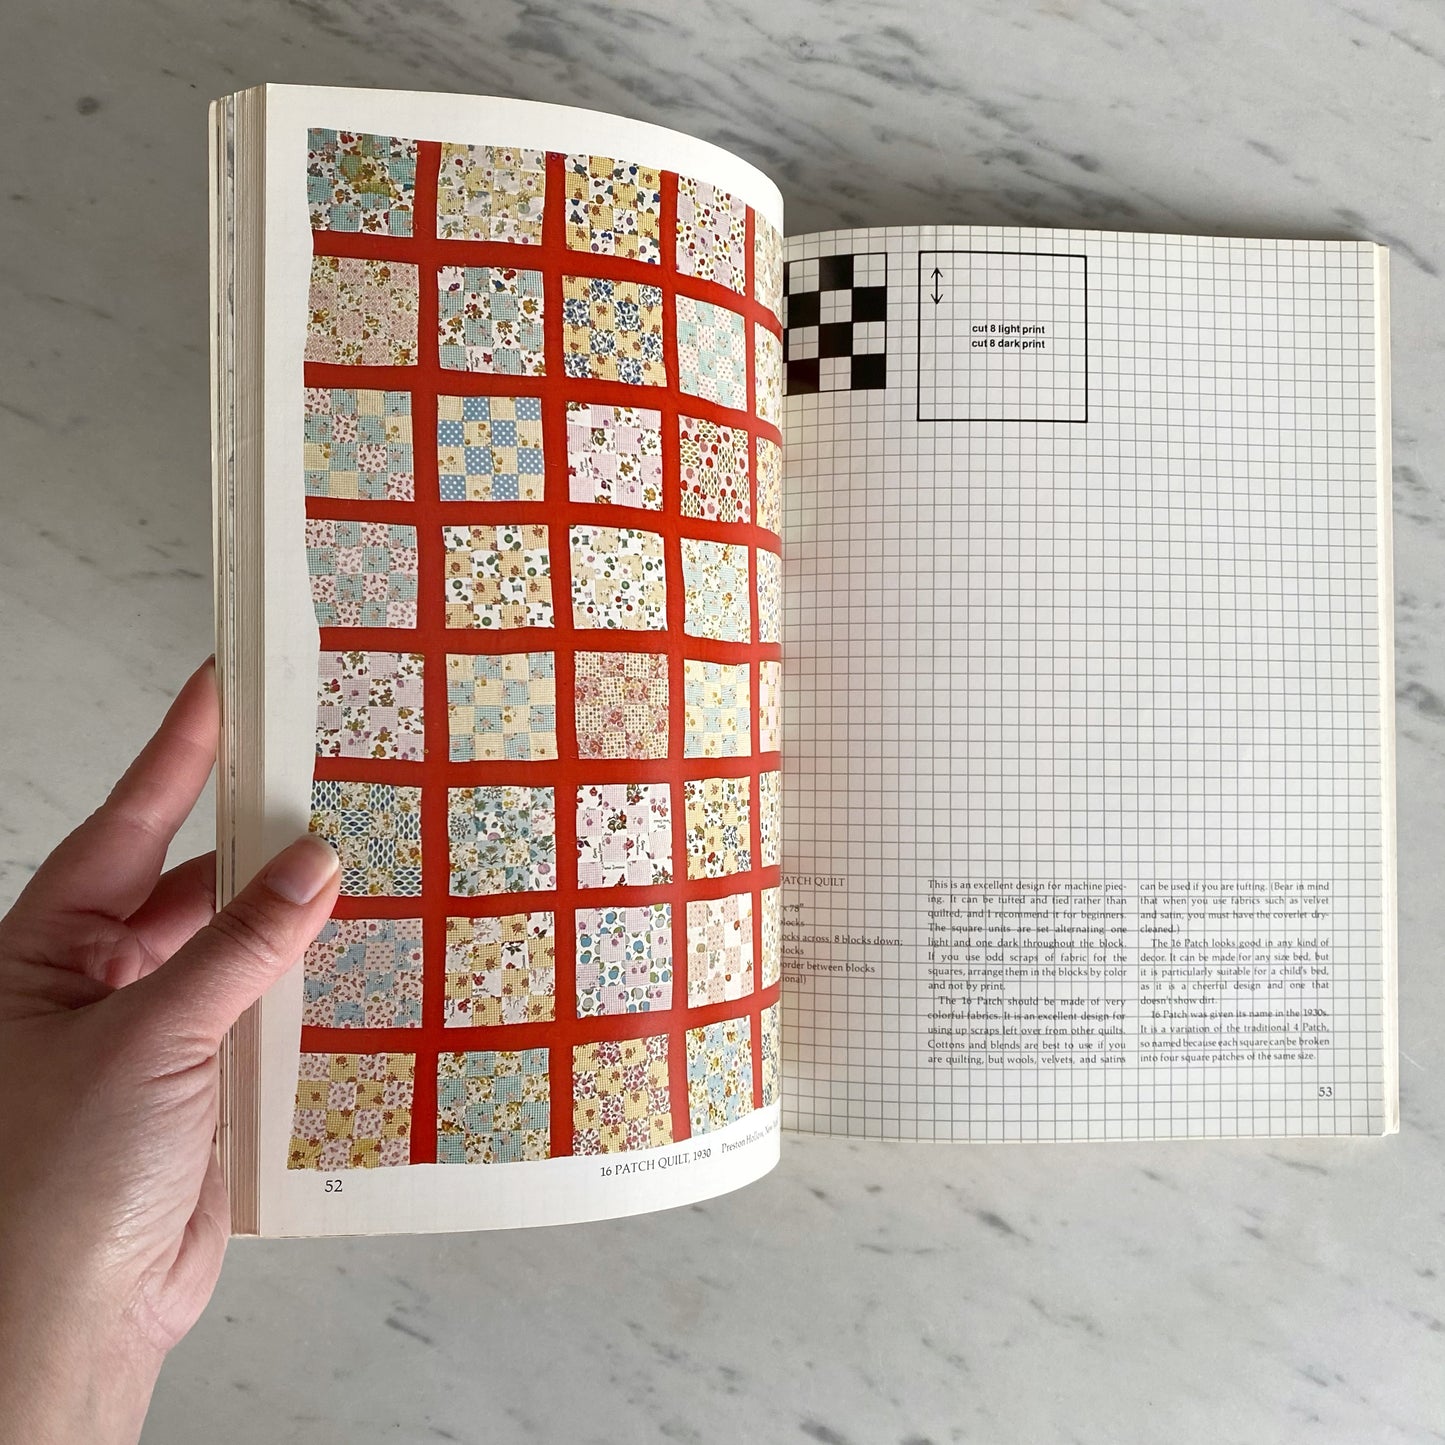 Book: Once Upon a Quilt (1973)